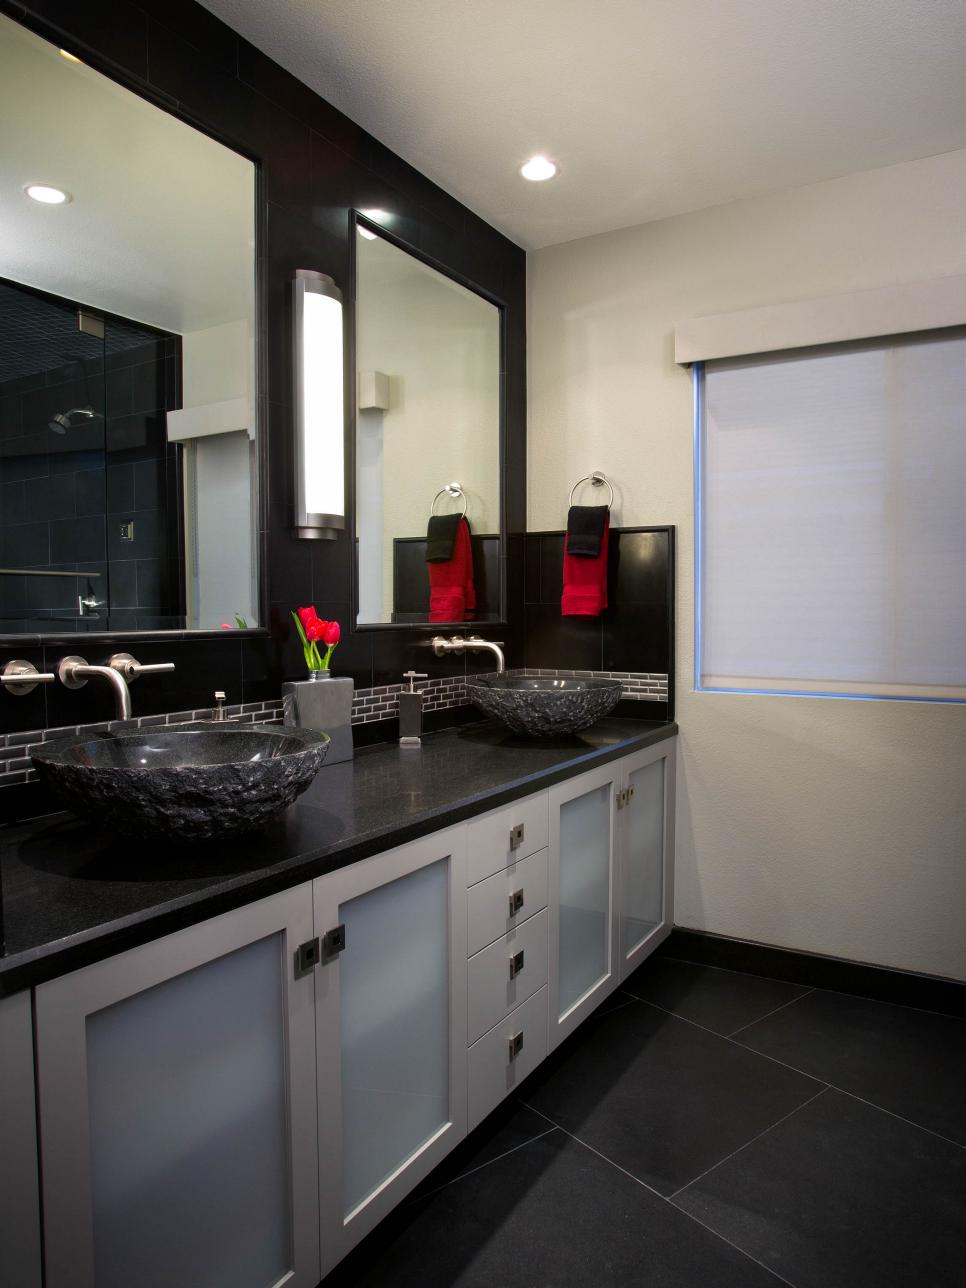 Sleek Bathroom with White Lacquered Cabinets and Vessel Sinks | HGTV